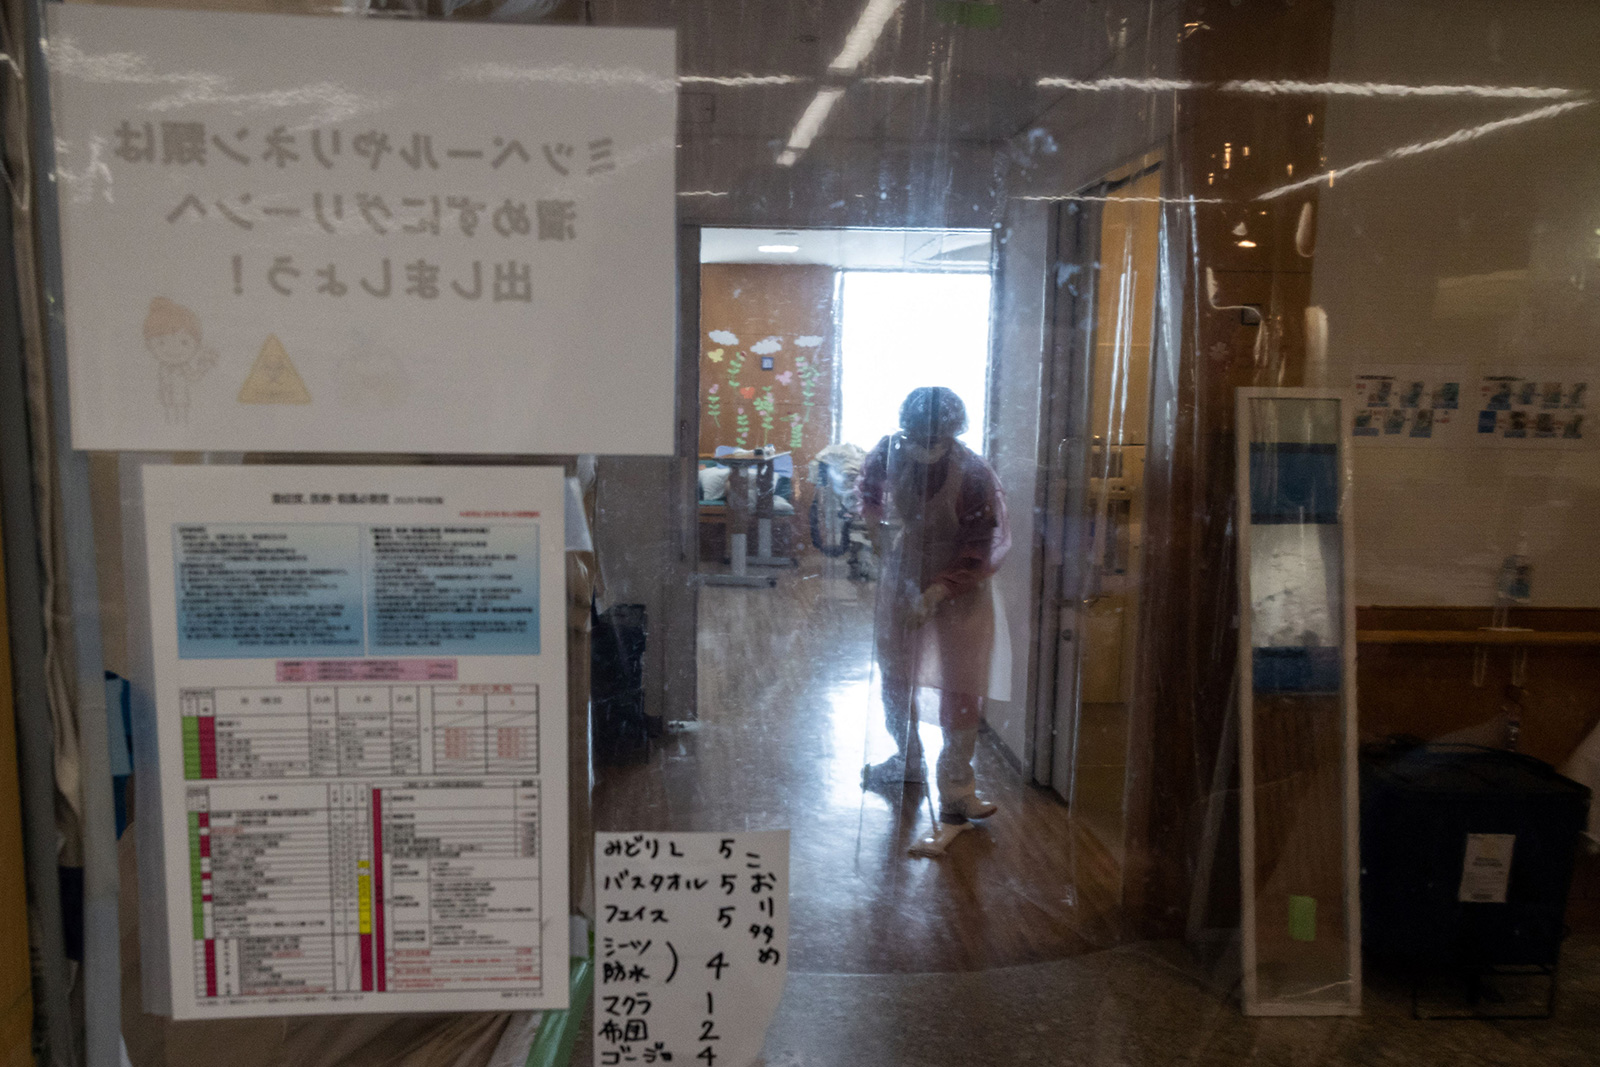 A Pegasus Corporation cleaner disinfects the floor of the "red zone" of the Covid-19 ward at St. Marianna University Kawasaki Municipal Tama Hospital outside of Tokyo on June 15.